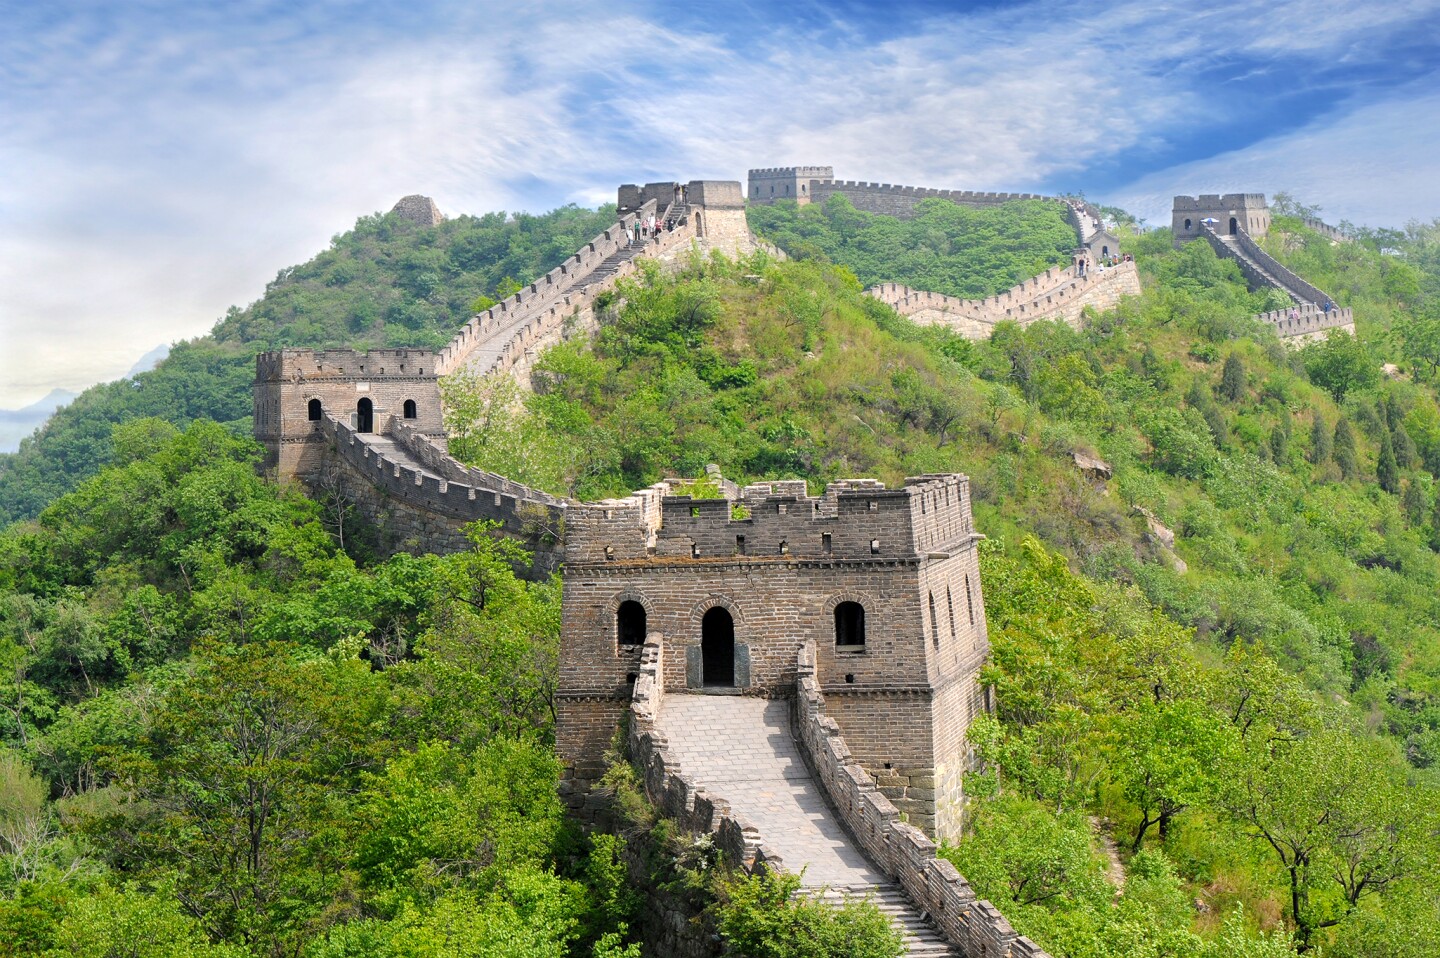 <h2>9. The Great Wall of China</h2> <p><i>China</i><br> It took more than 2,500 years to build <a class="Link" href="https://whc.unesco.org/en/list/438" rel="noopener">the Great Wall</a>, China’s most recognizable symbol, which snakes through the northern part of the country for more than 13,000 miles. During the 8th century B.C.E., the Zhou dynasty–era state of Chu began construction on the wall to protect against foreign invaders. Most tourists explore a section or two of the stone-and-brick fortification; it would take approximately 177 days of nonstop walking to see the entire wall. </p> <h3>How to visit</h3> <p> Frequently visited sections of the wall include Mutianyu and Jinshanling. The former is a 90-minute drive from Beijing and an easy day trip; the latter takes twice as long to reach but is one of the wall’s most well-preserved sections and is popular with hikers. Each section of the wall requires its own entry ticket. The cost is typically about $6 to $8, although prices vary.</p>